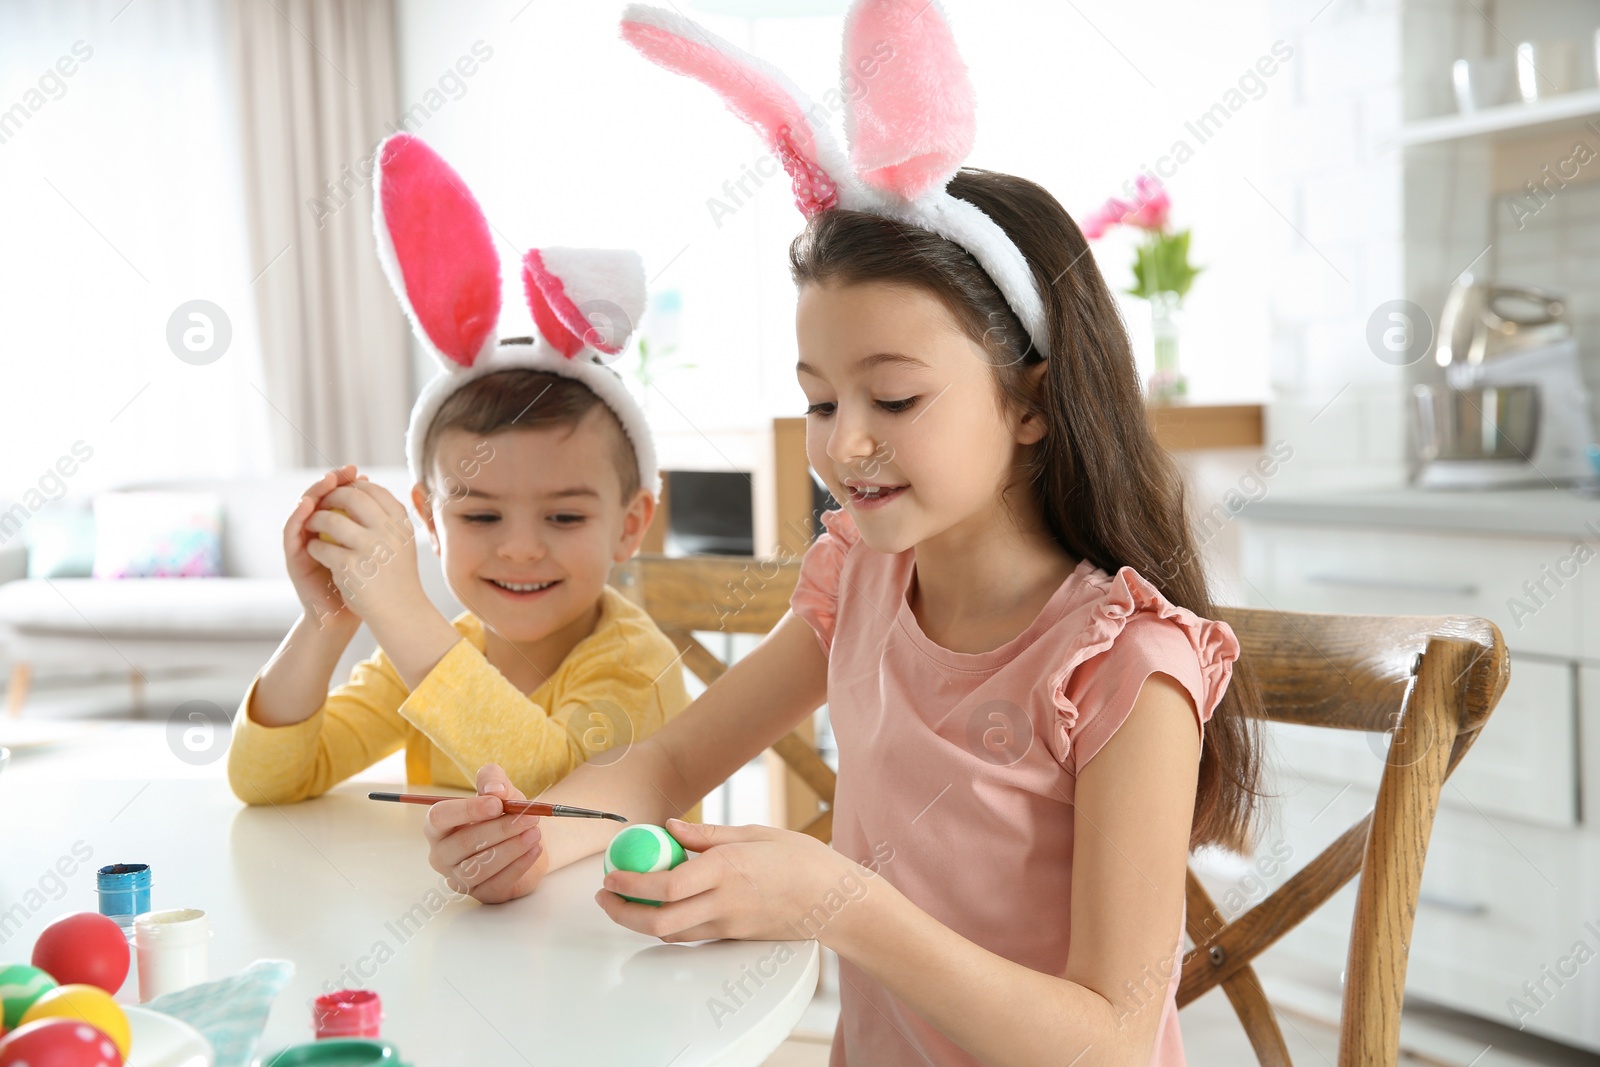 Photo of Cute children with bunny ears headbands painting Easter eggs in kitchen